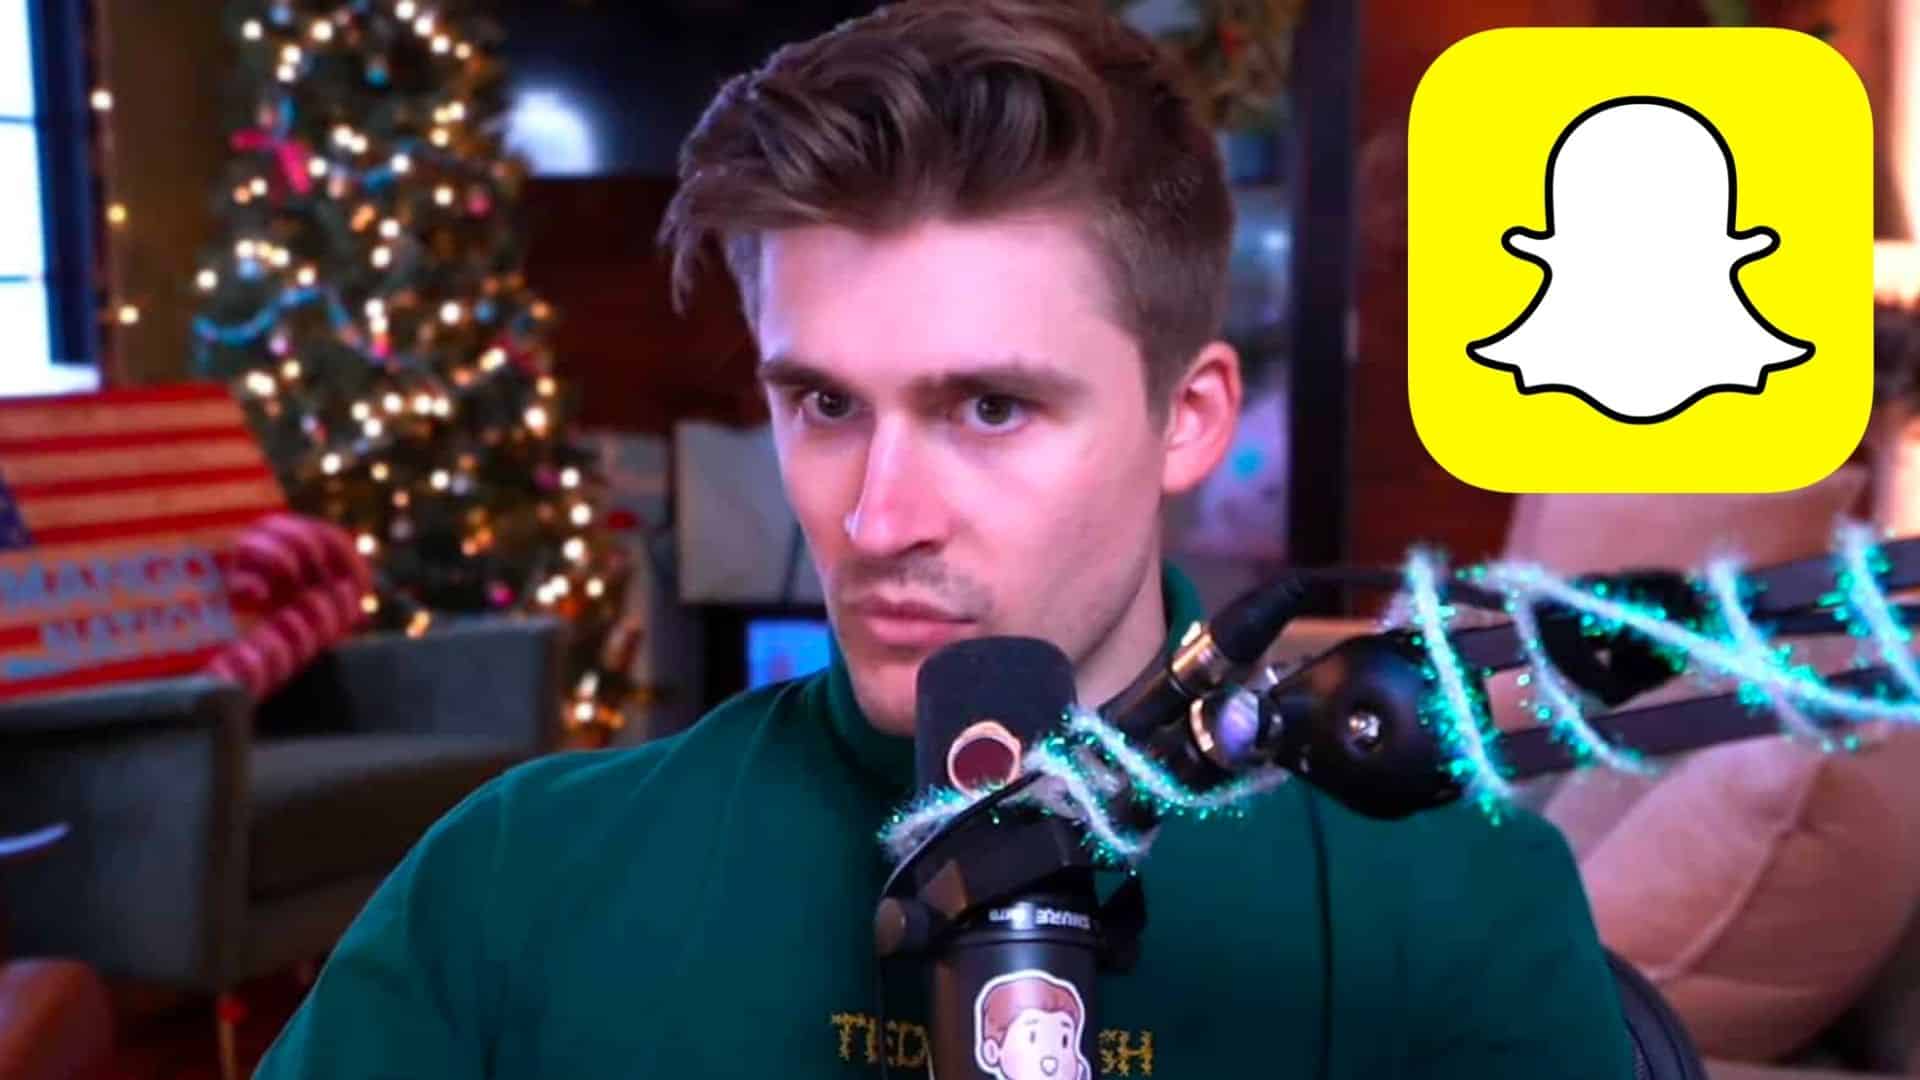 Ludwig talking to microphone with Snapchat logo